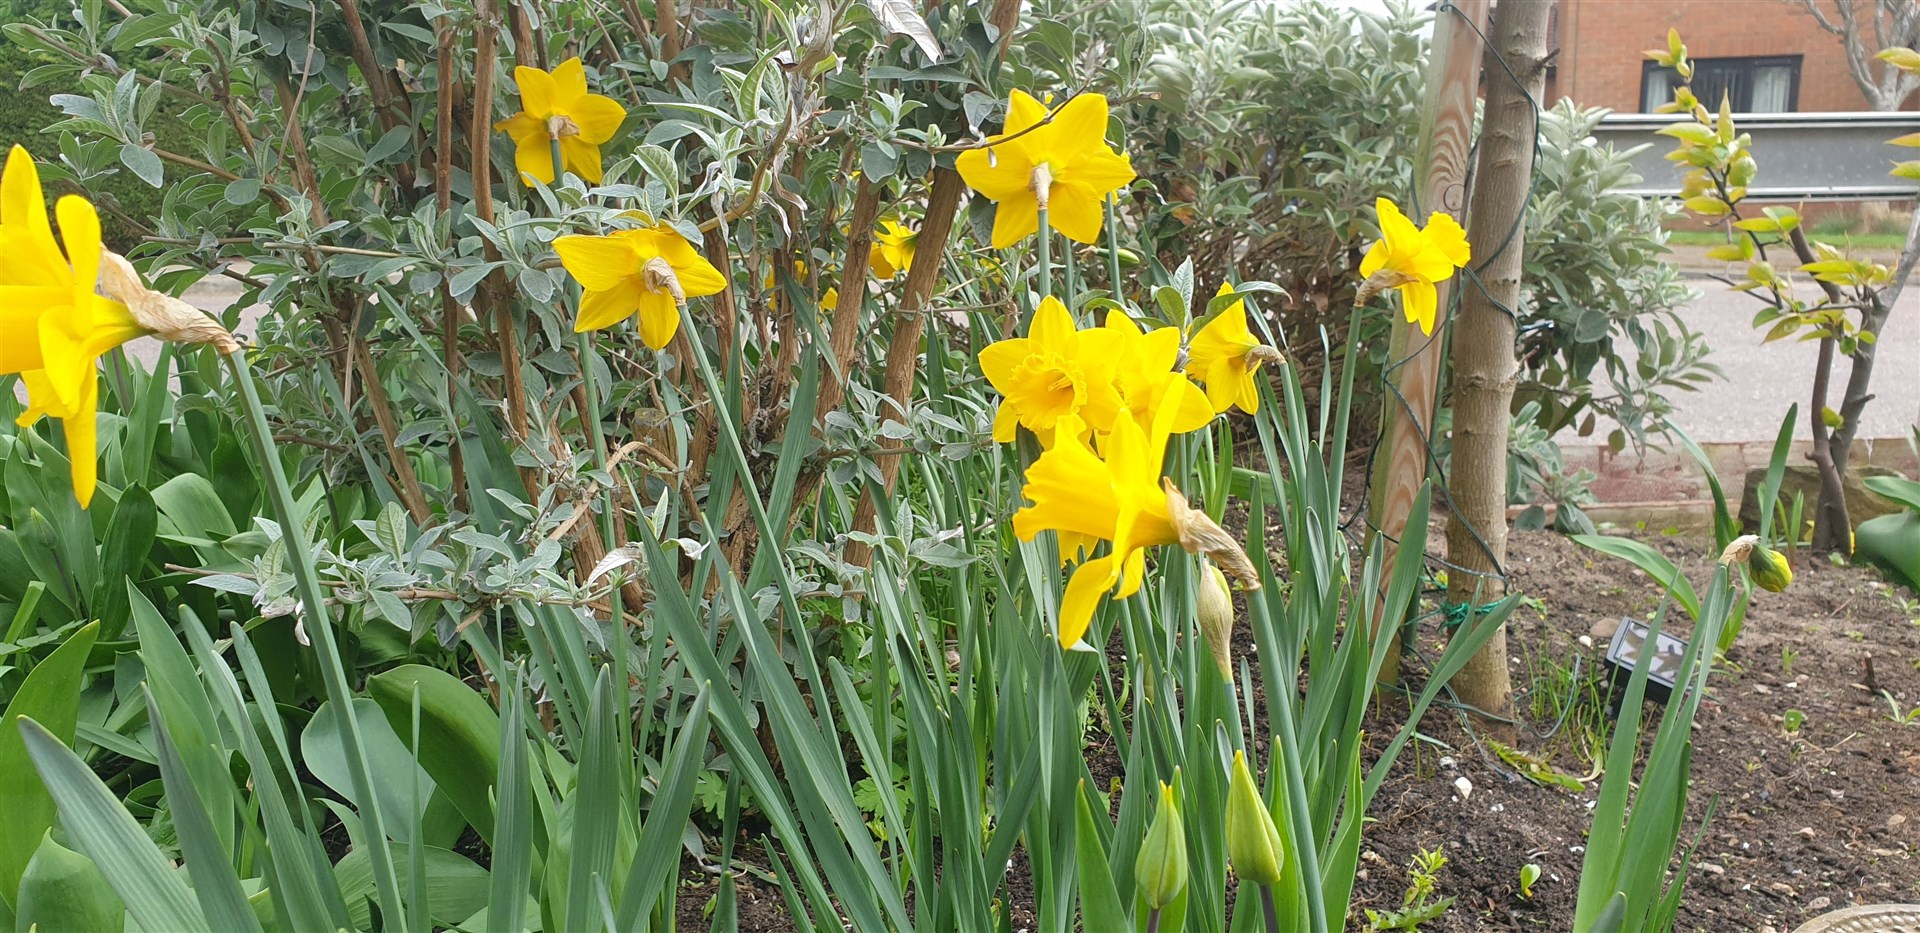 You can't beat daffodils at this time of year.